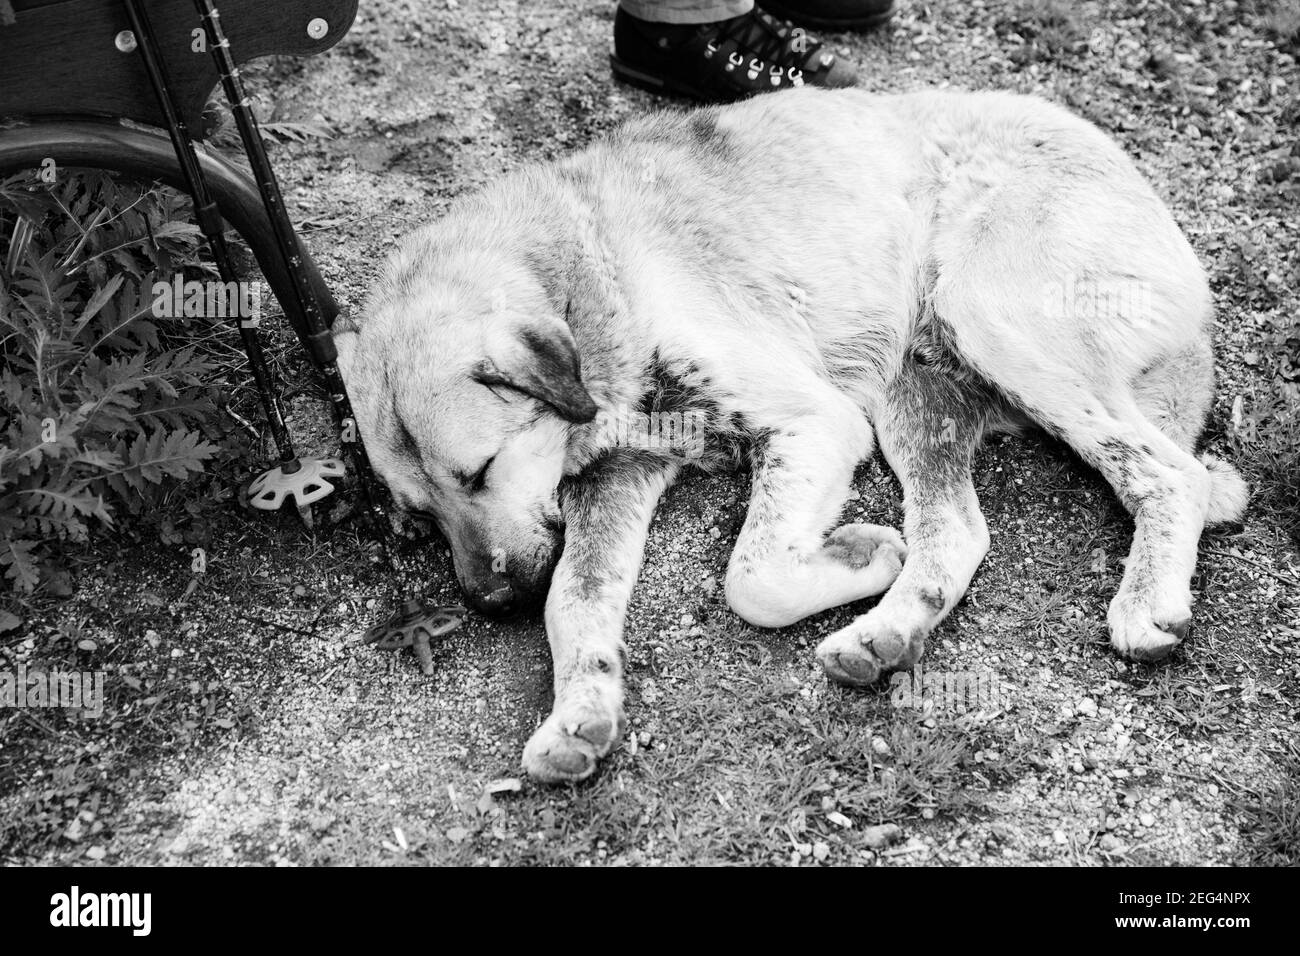 Dog sleeps on ground near trekking poles and wooden chair. Black and white retro toned image. High contrast. Stock Photo